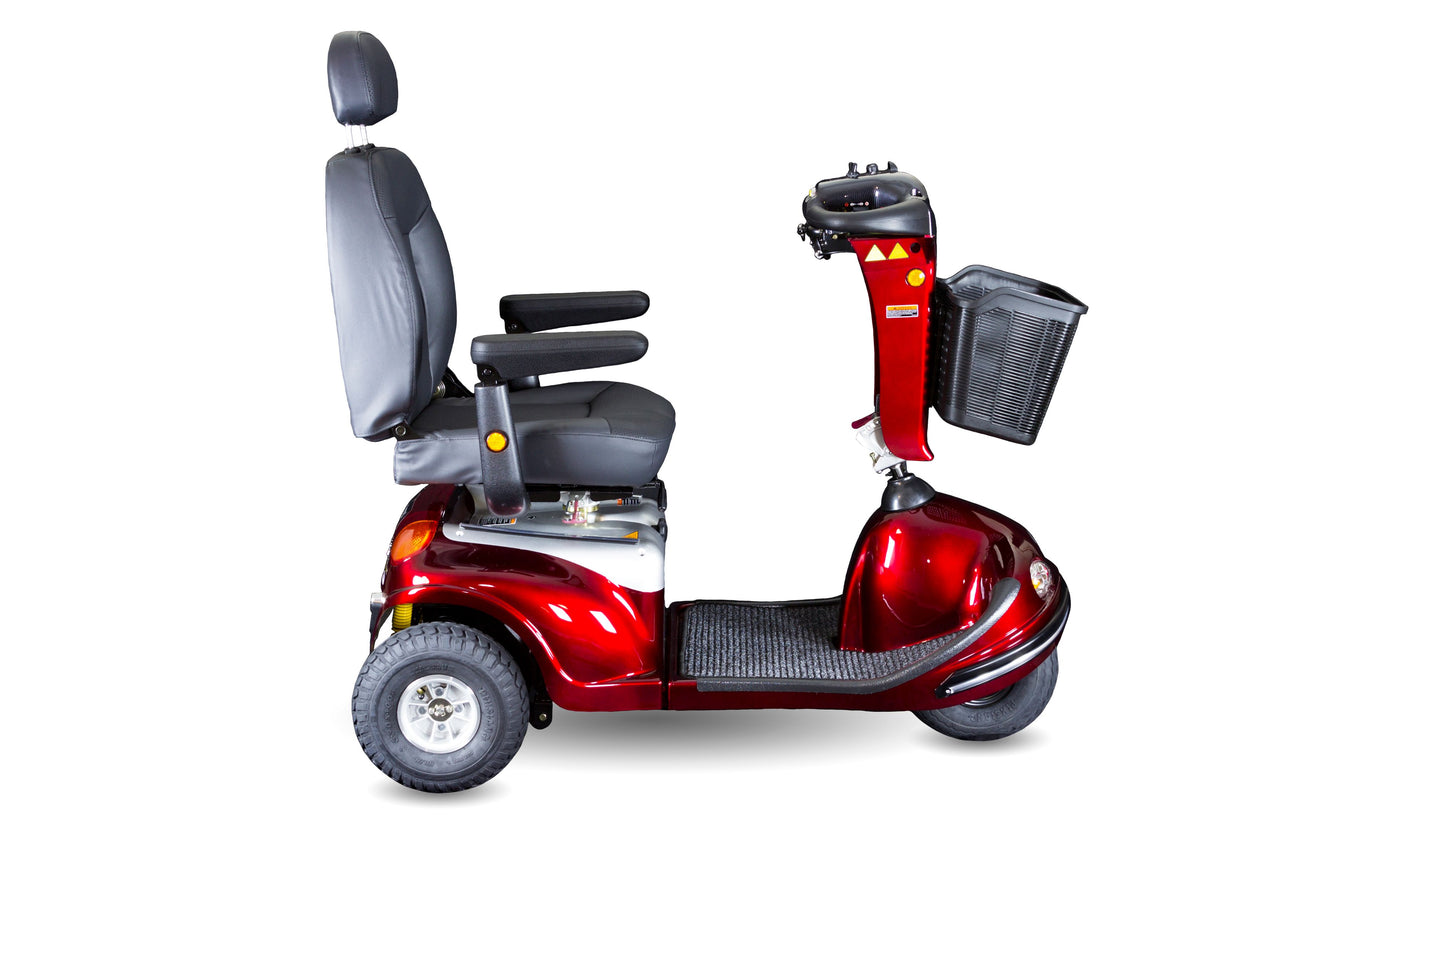 Shoprider Enduro XL3 Heavy Duty 3-Wheel Long Distance Mobility Scooter - Swivel Chair, Full Suspension For Max Comfort, 500lbs Weight Capacity, For Seniors